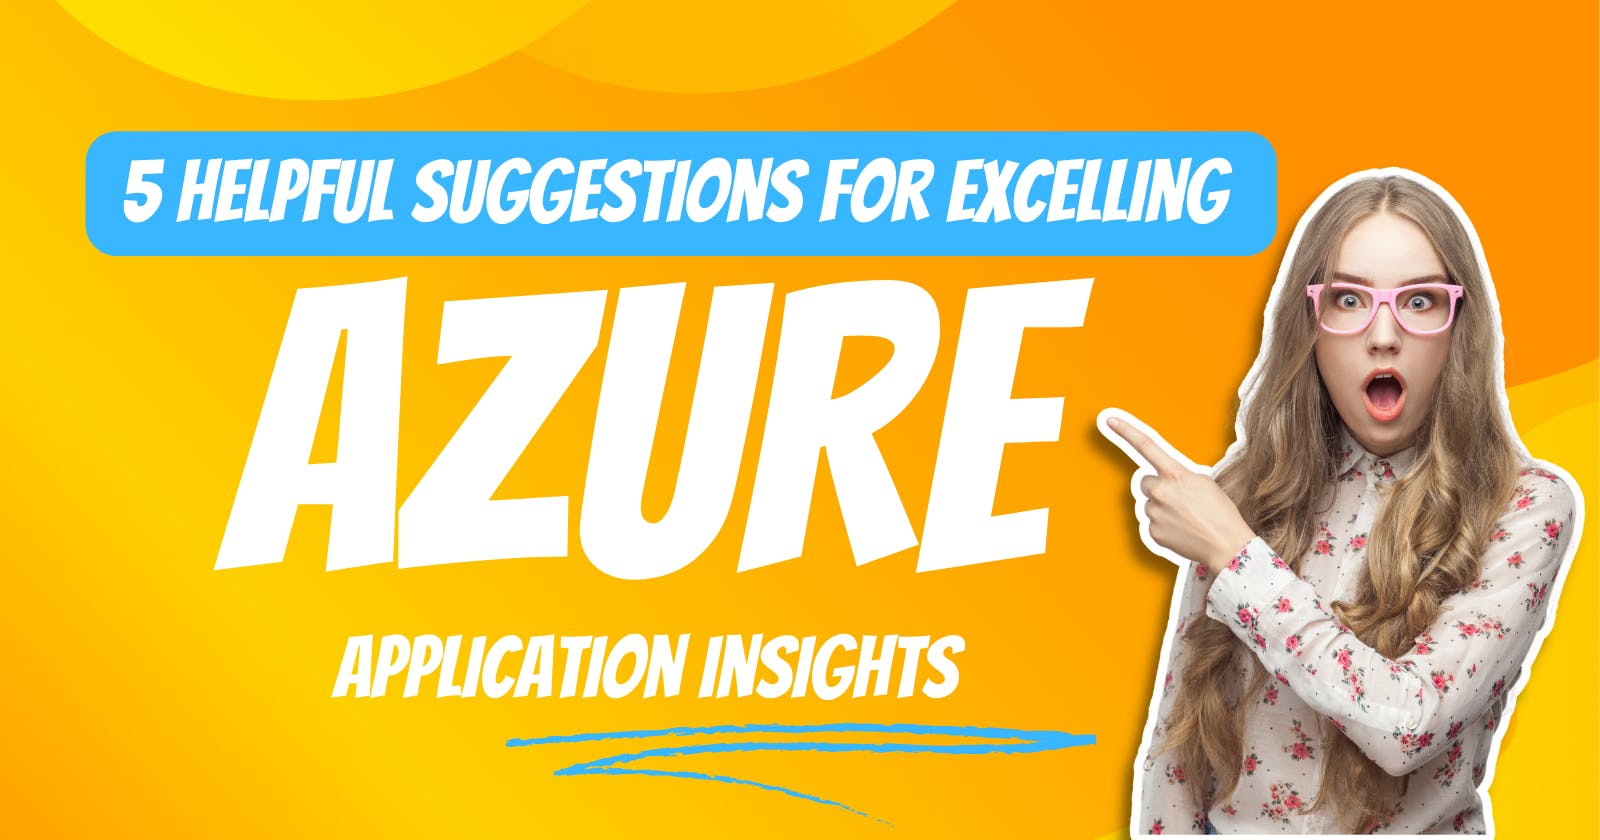 5 Helpful Suggestions for Excelling with Azure Application Insights